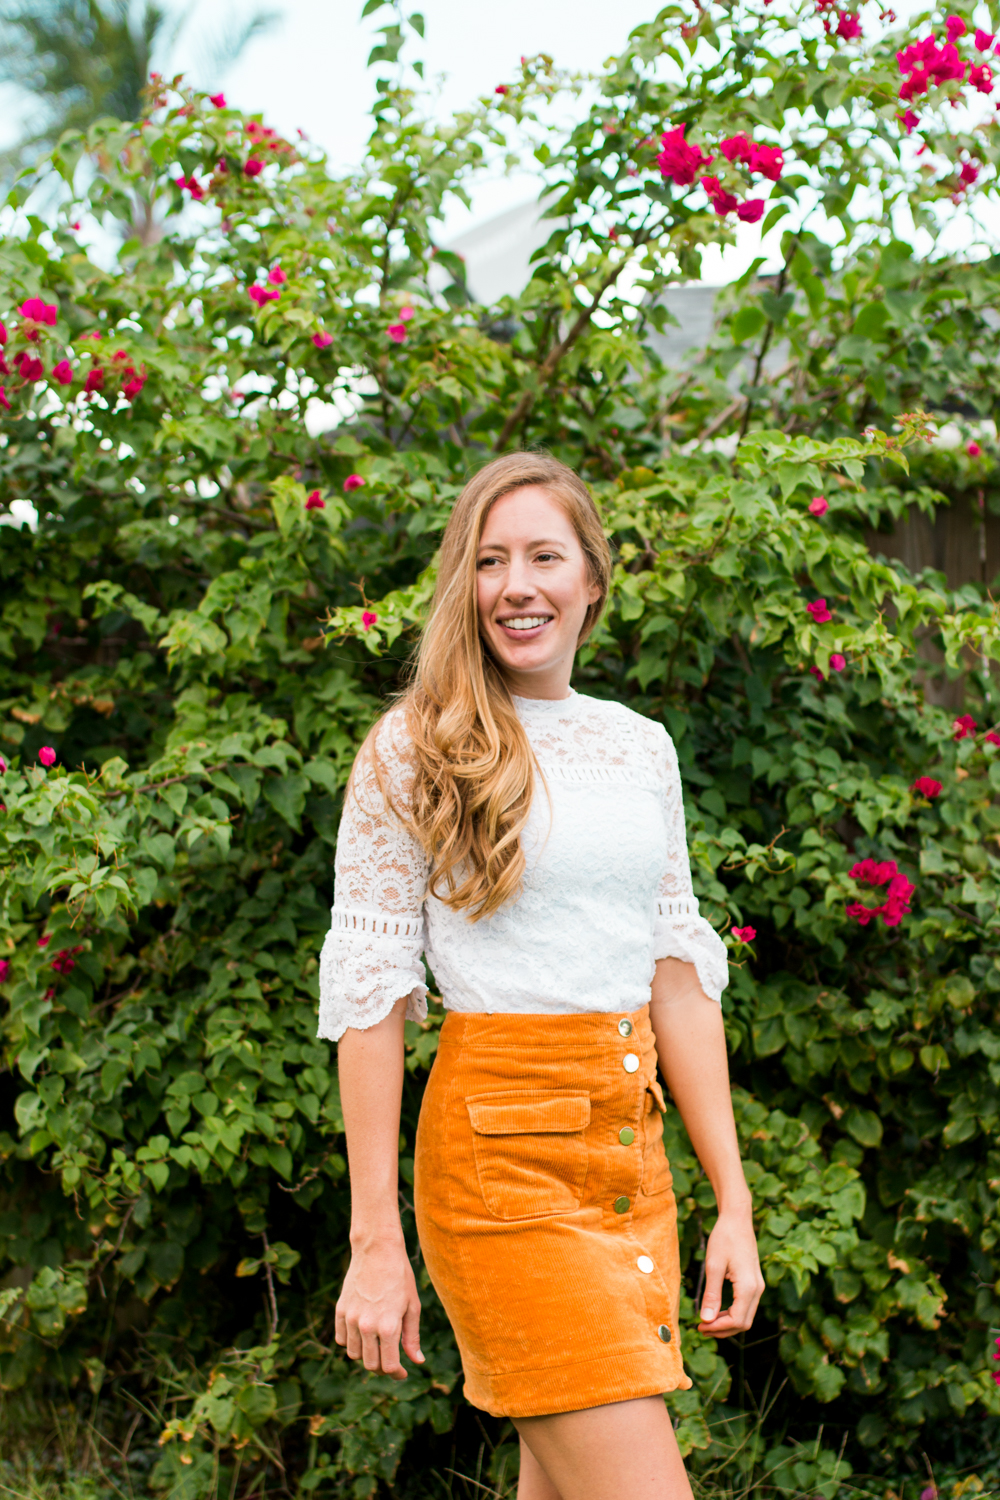 How to Style a Lace Top for Fall | How to Wear a Lace Top for Fall | Suede Skirt | Corduroy Skirt | How to Dress for Fall in Warm Weather | Fall Outfit Idea | Corduroy Button Up Skirt - Sunshine Style, Florida Fashion Blog